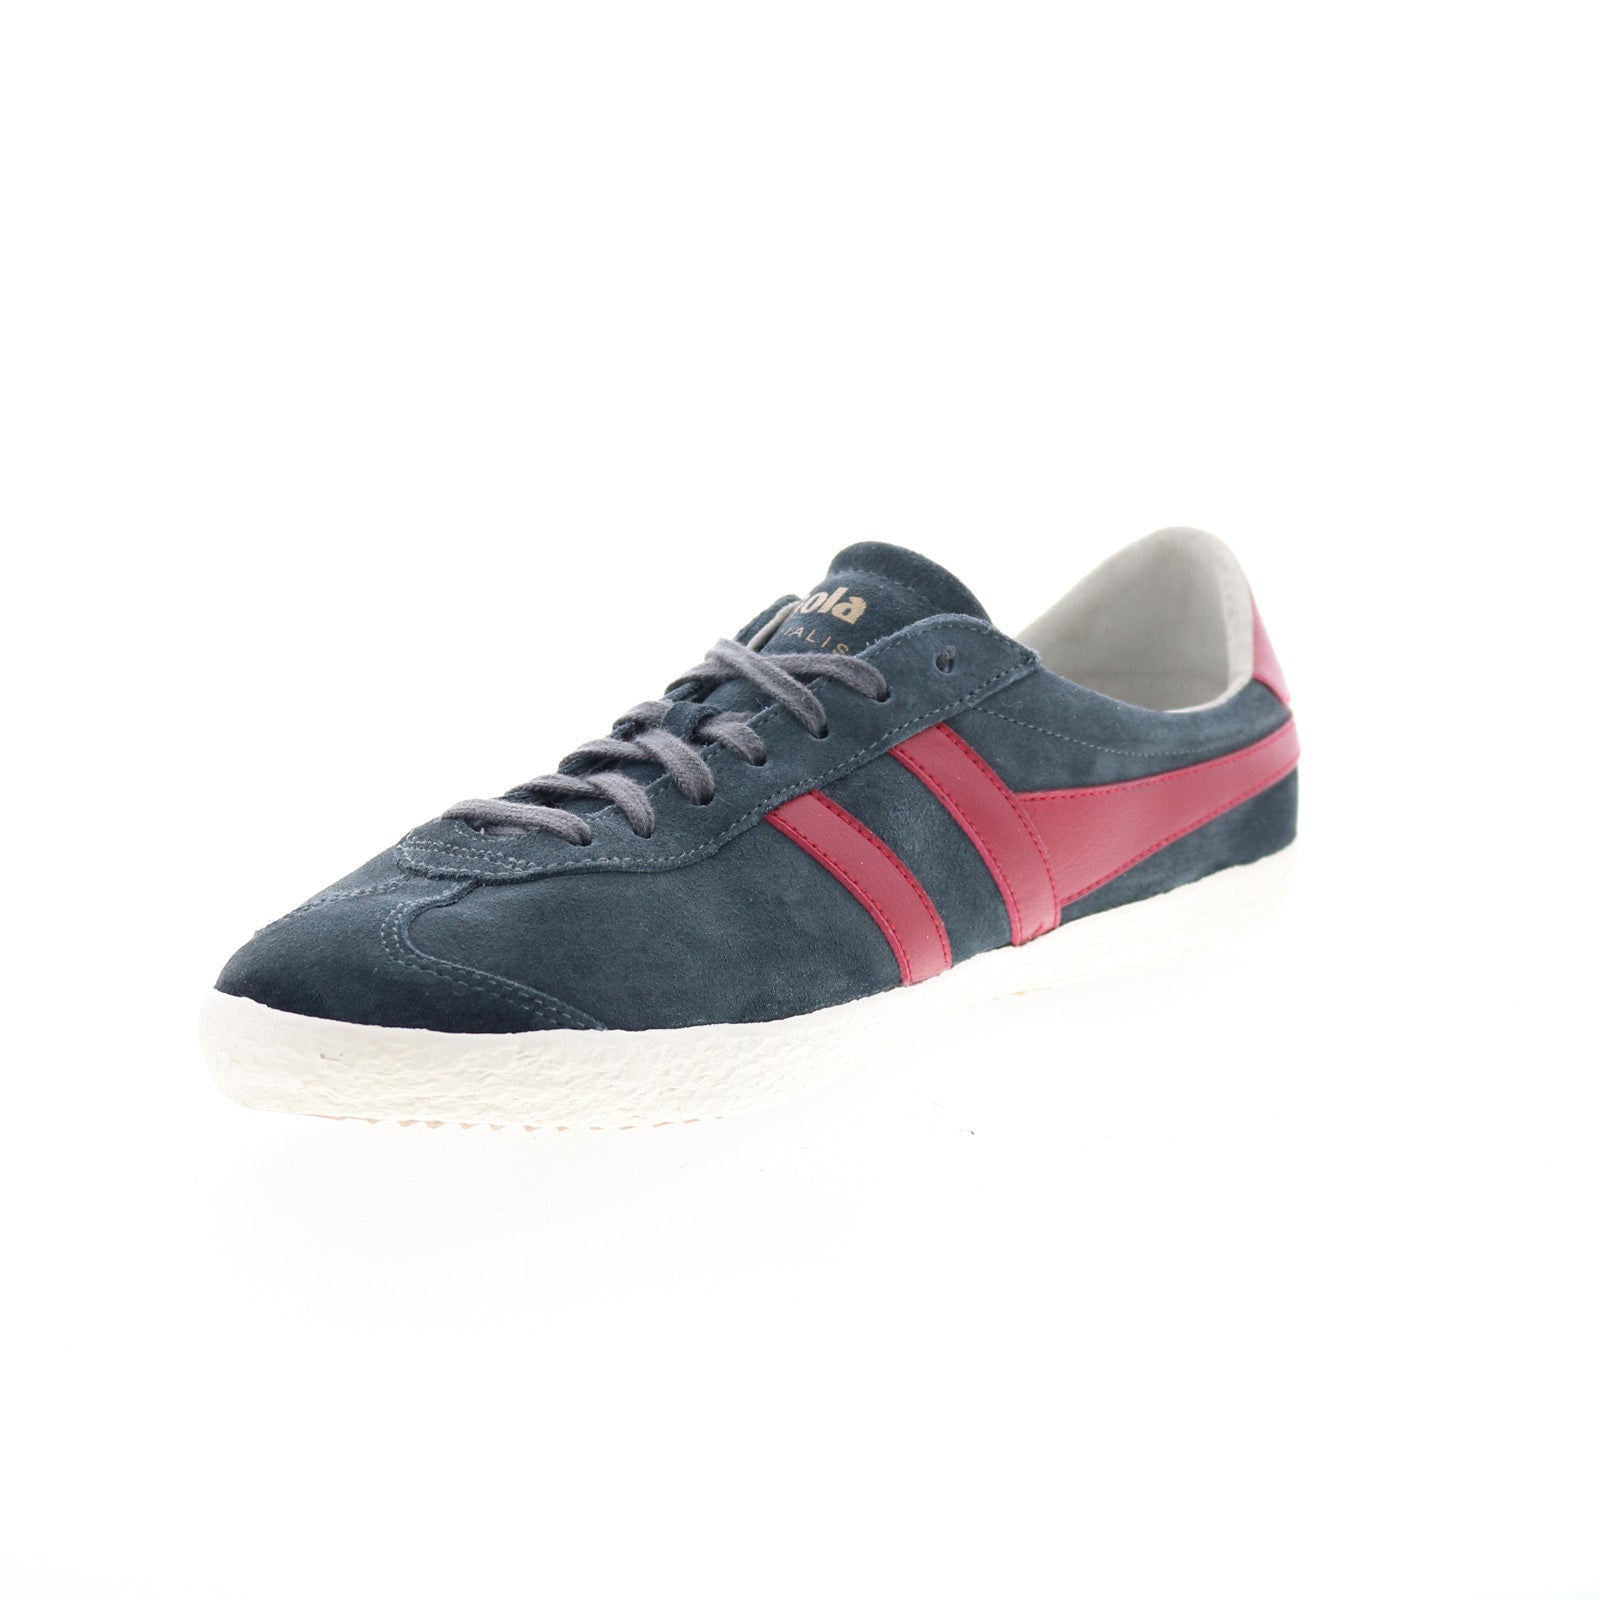 Gola Specialist CMA145 Mens Gray Suede Lace Up Lifestyle Sneakers Shoes